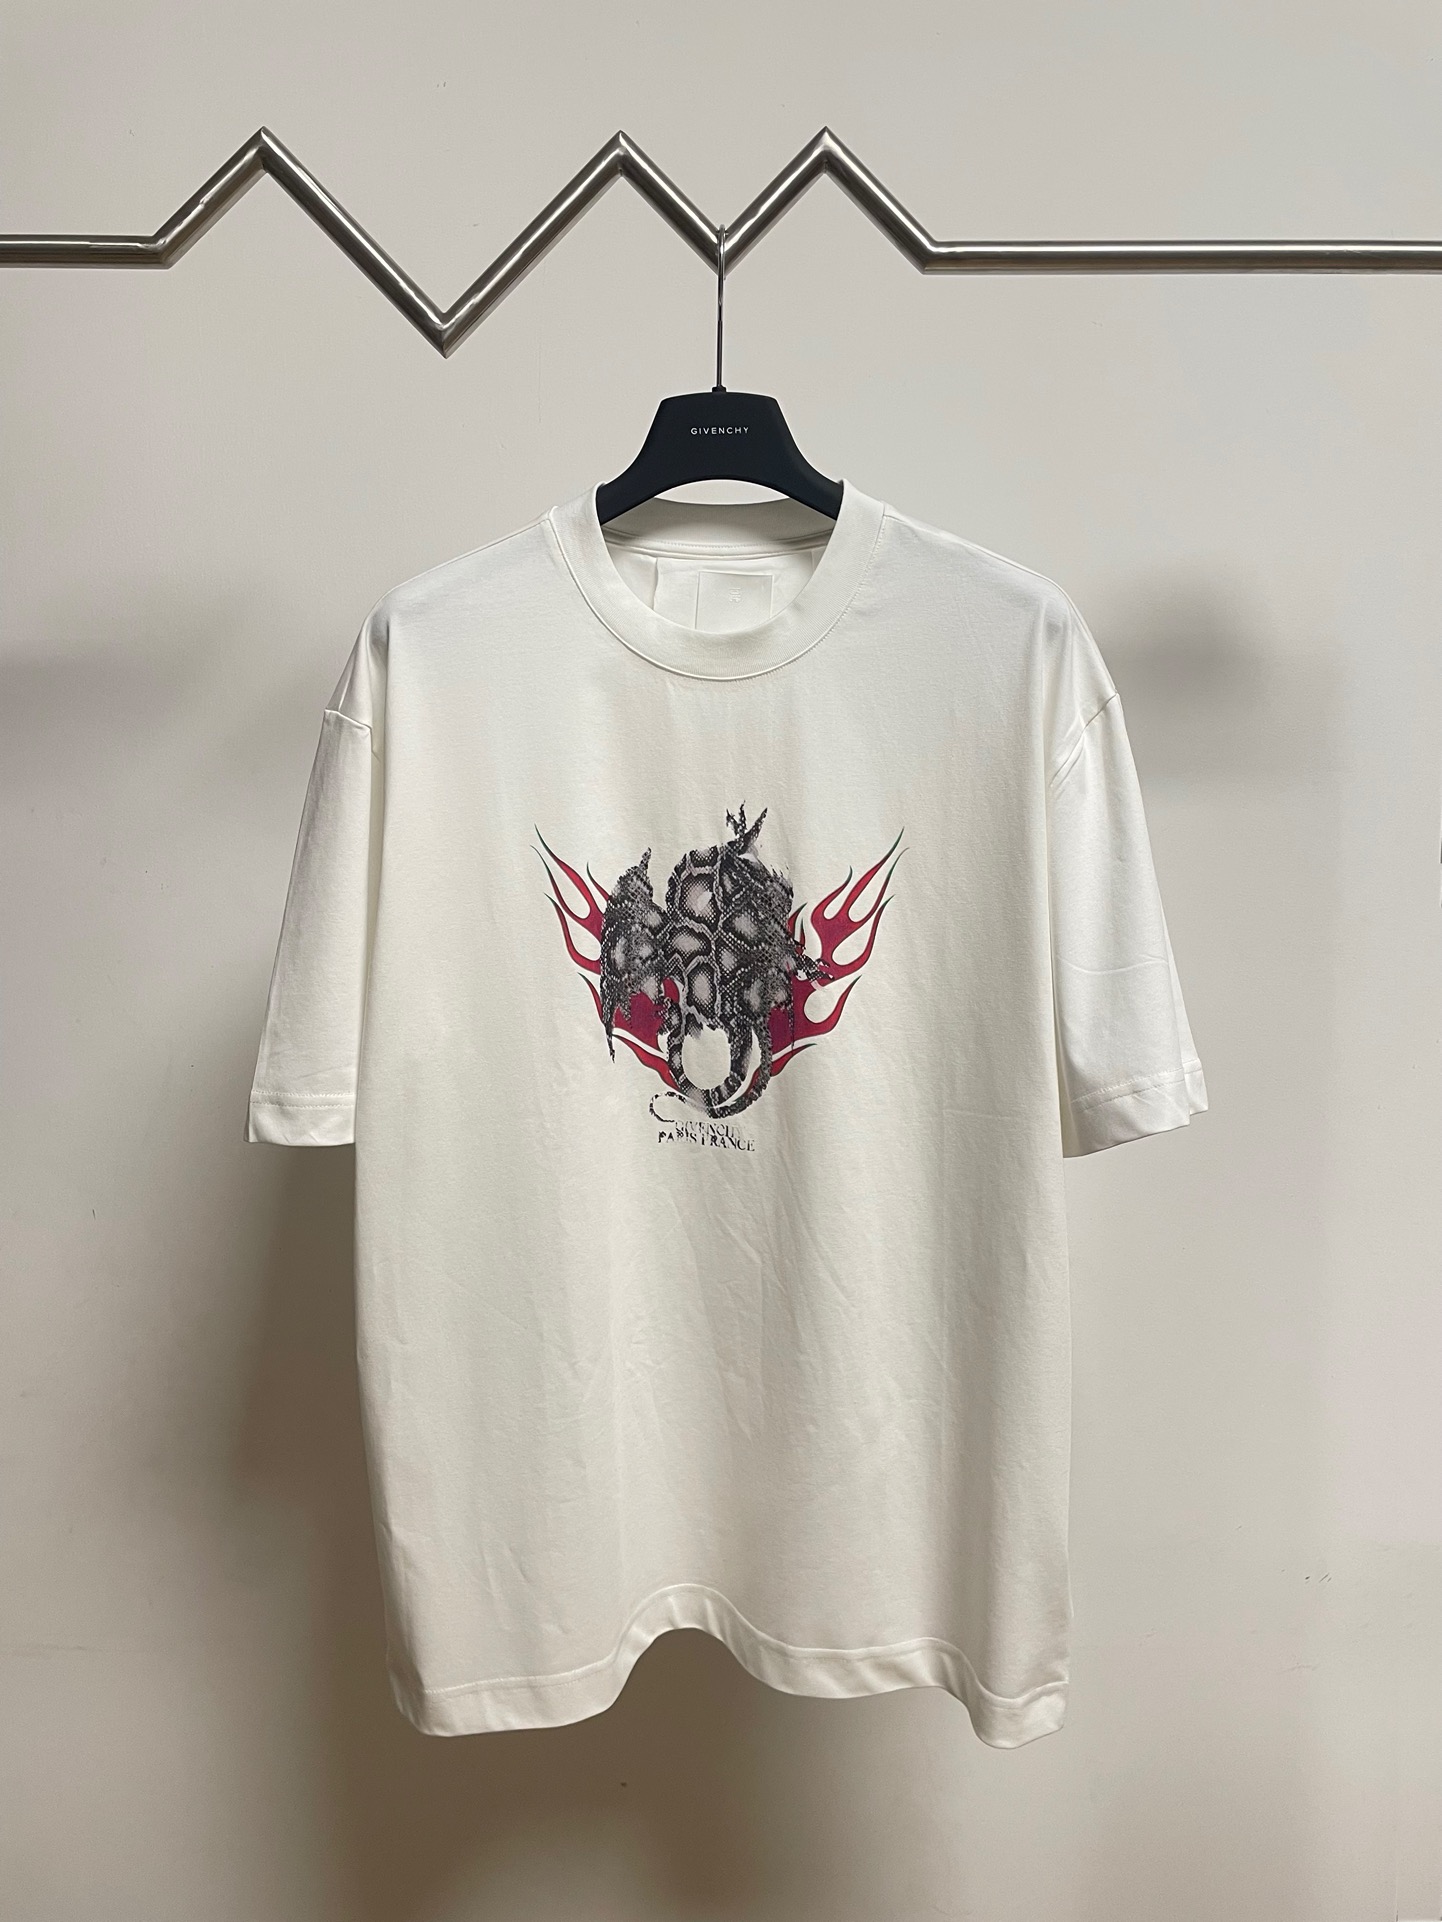 Givenchy Clothing T-Shirt White Printing Unisex Cotton Mercerized Spring/Summer Collection Short Sleeve